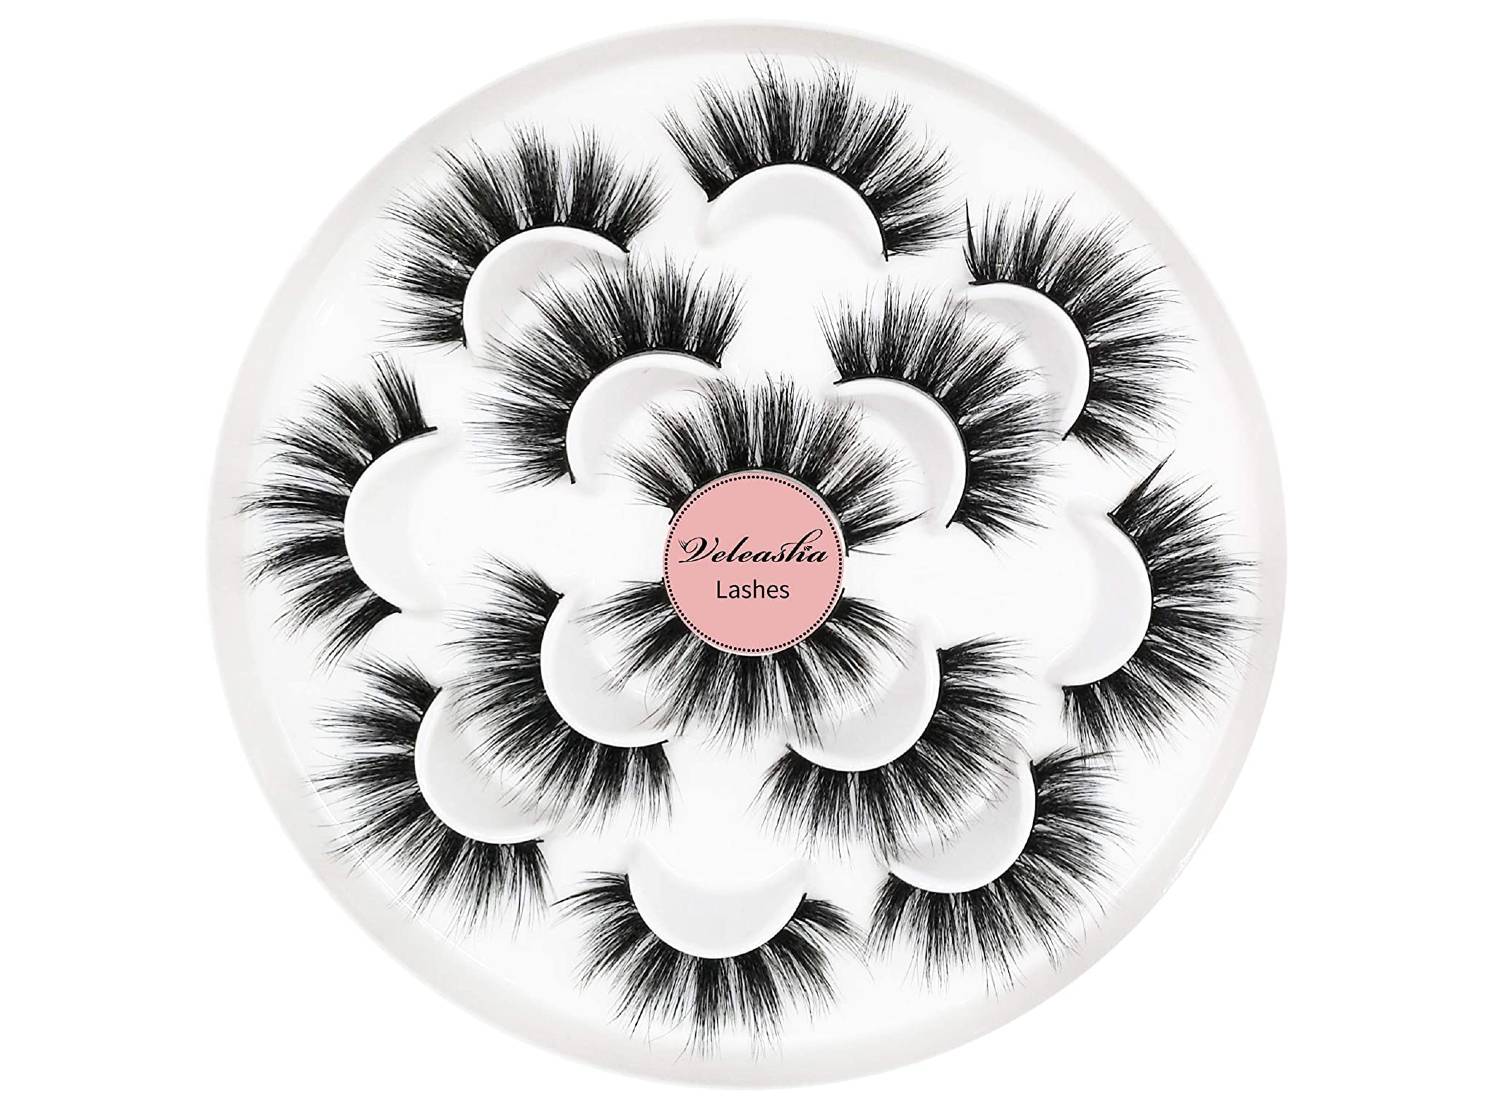 Circular package of seven pairs of faux minx eyelashes